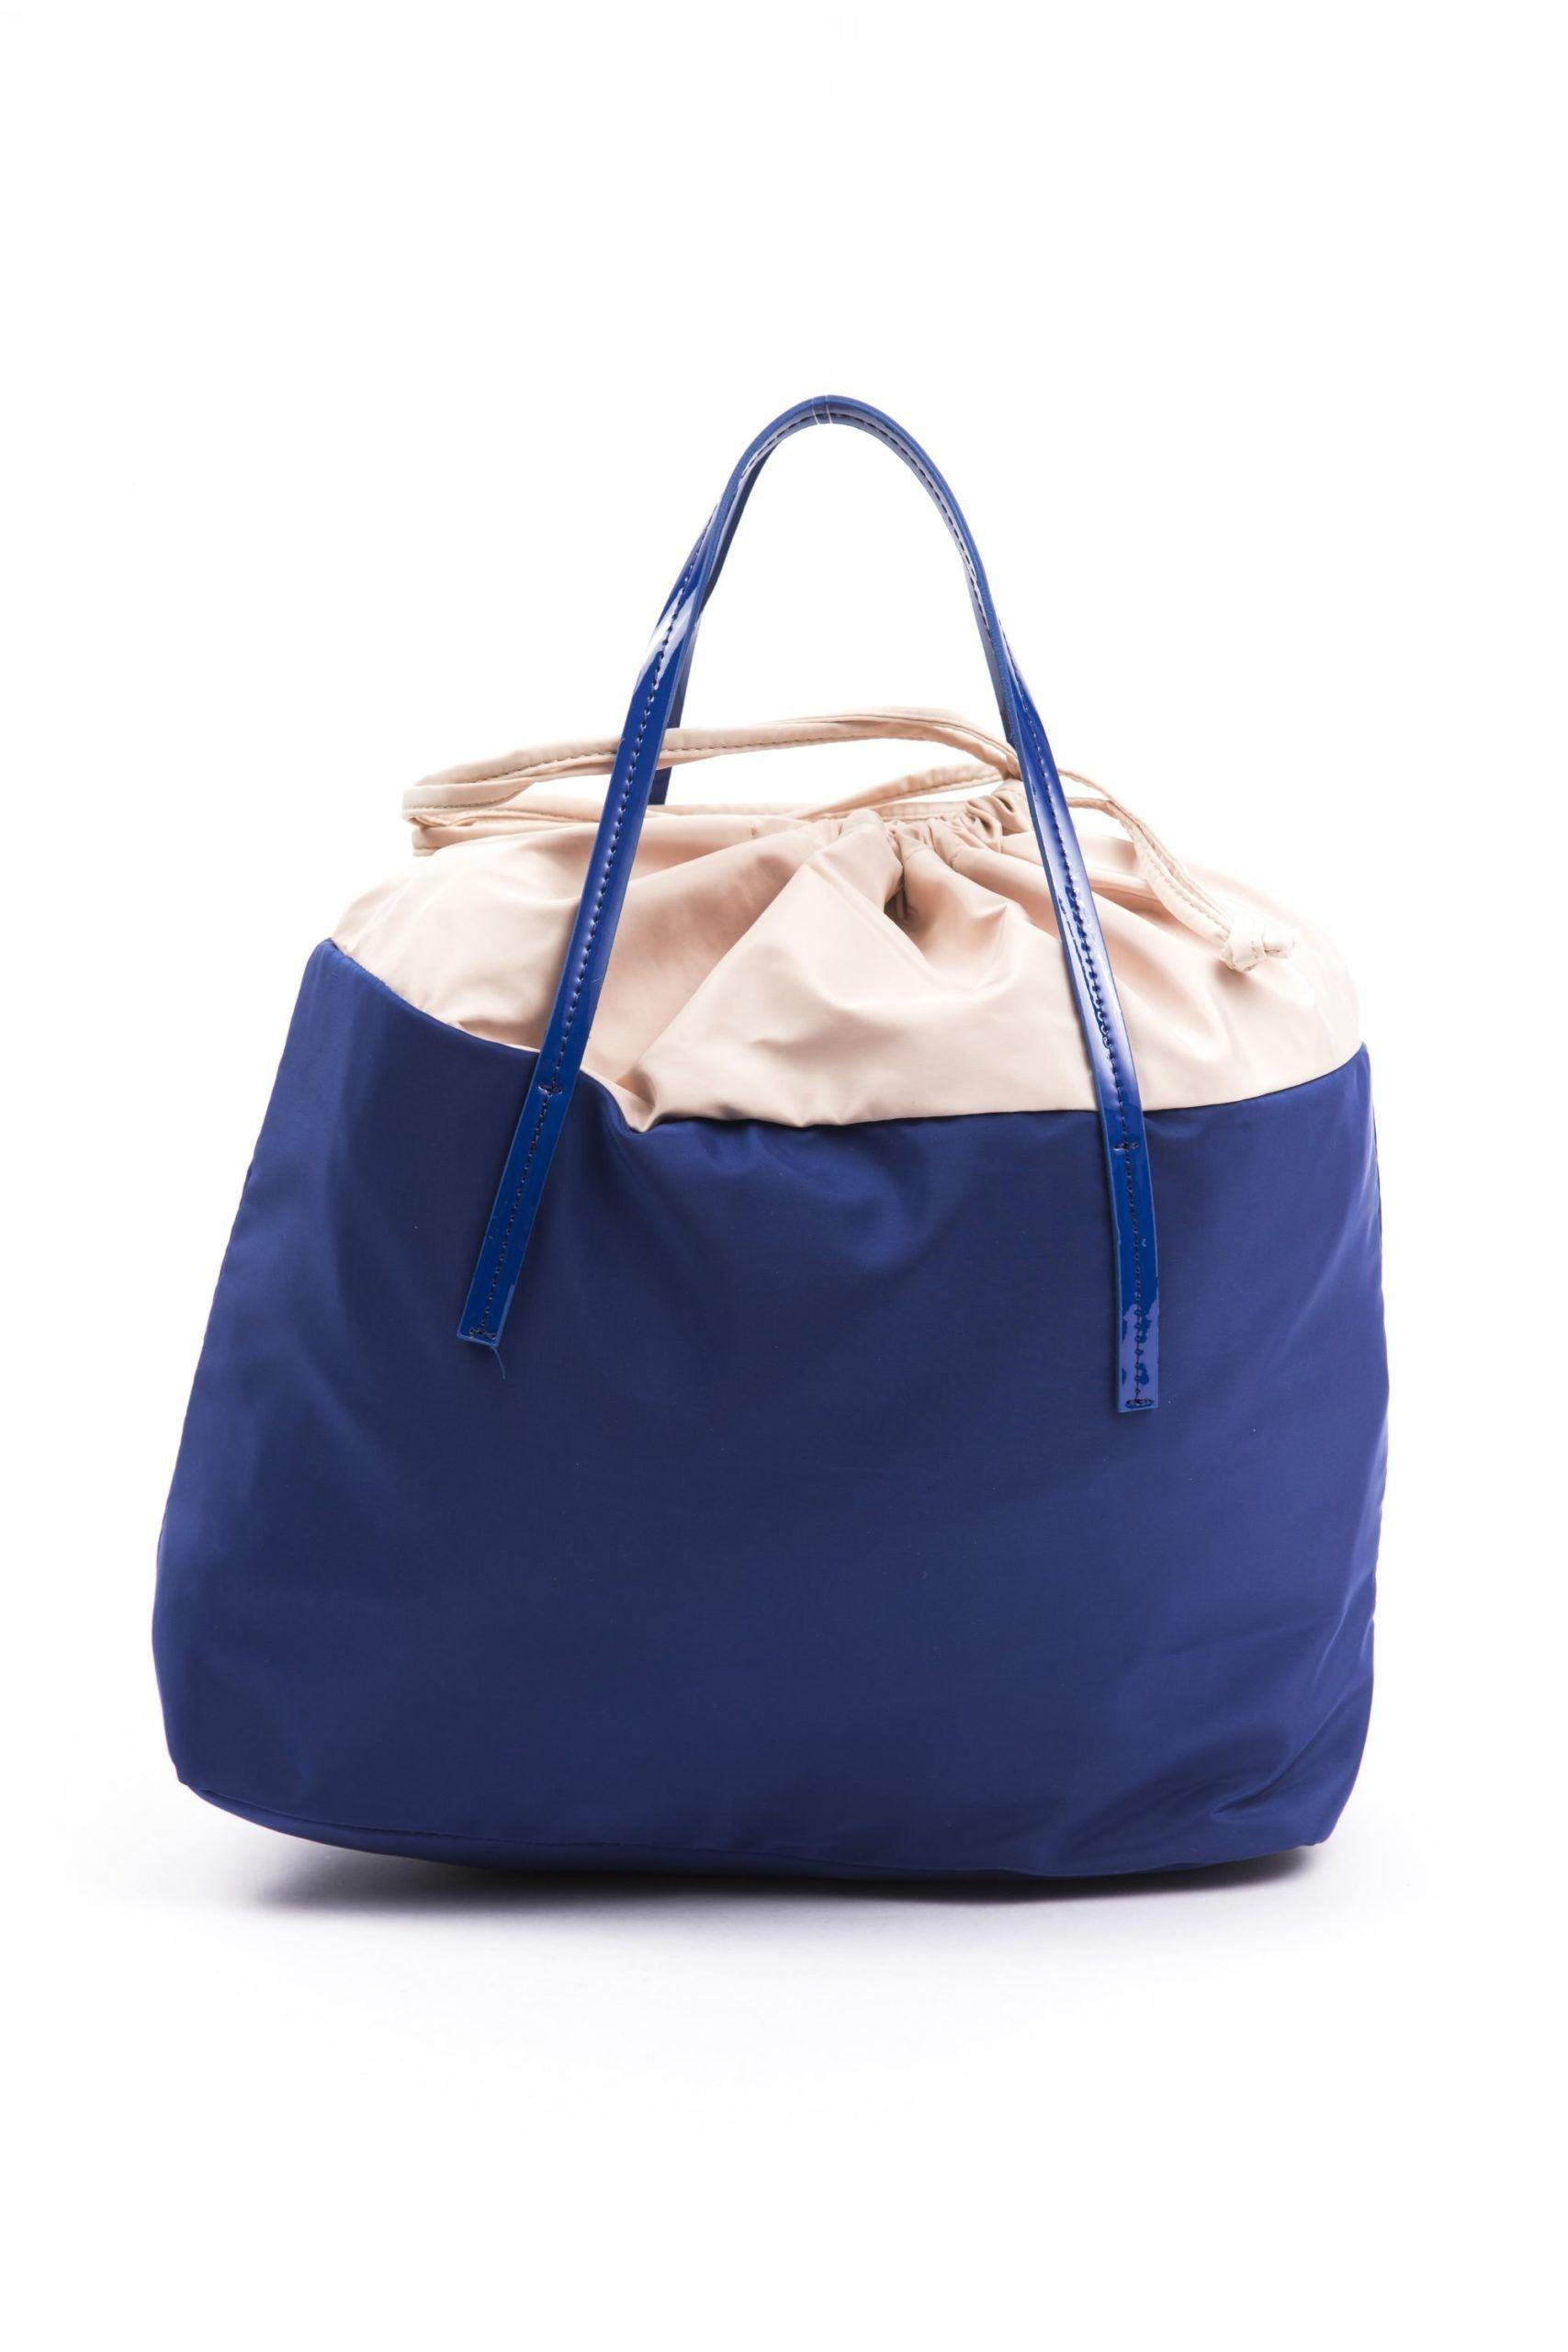 BYBLOS Chic Blue Fabric Shopper Tote with Patent Accents - PER.FASHION